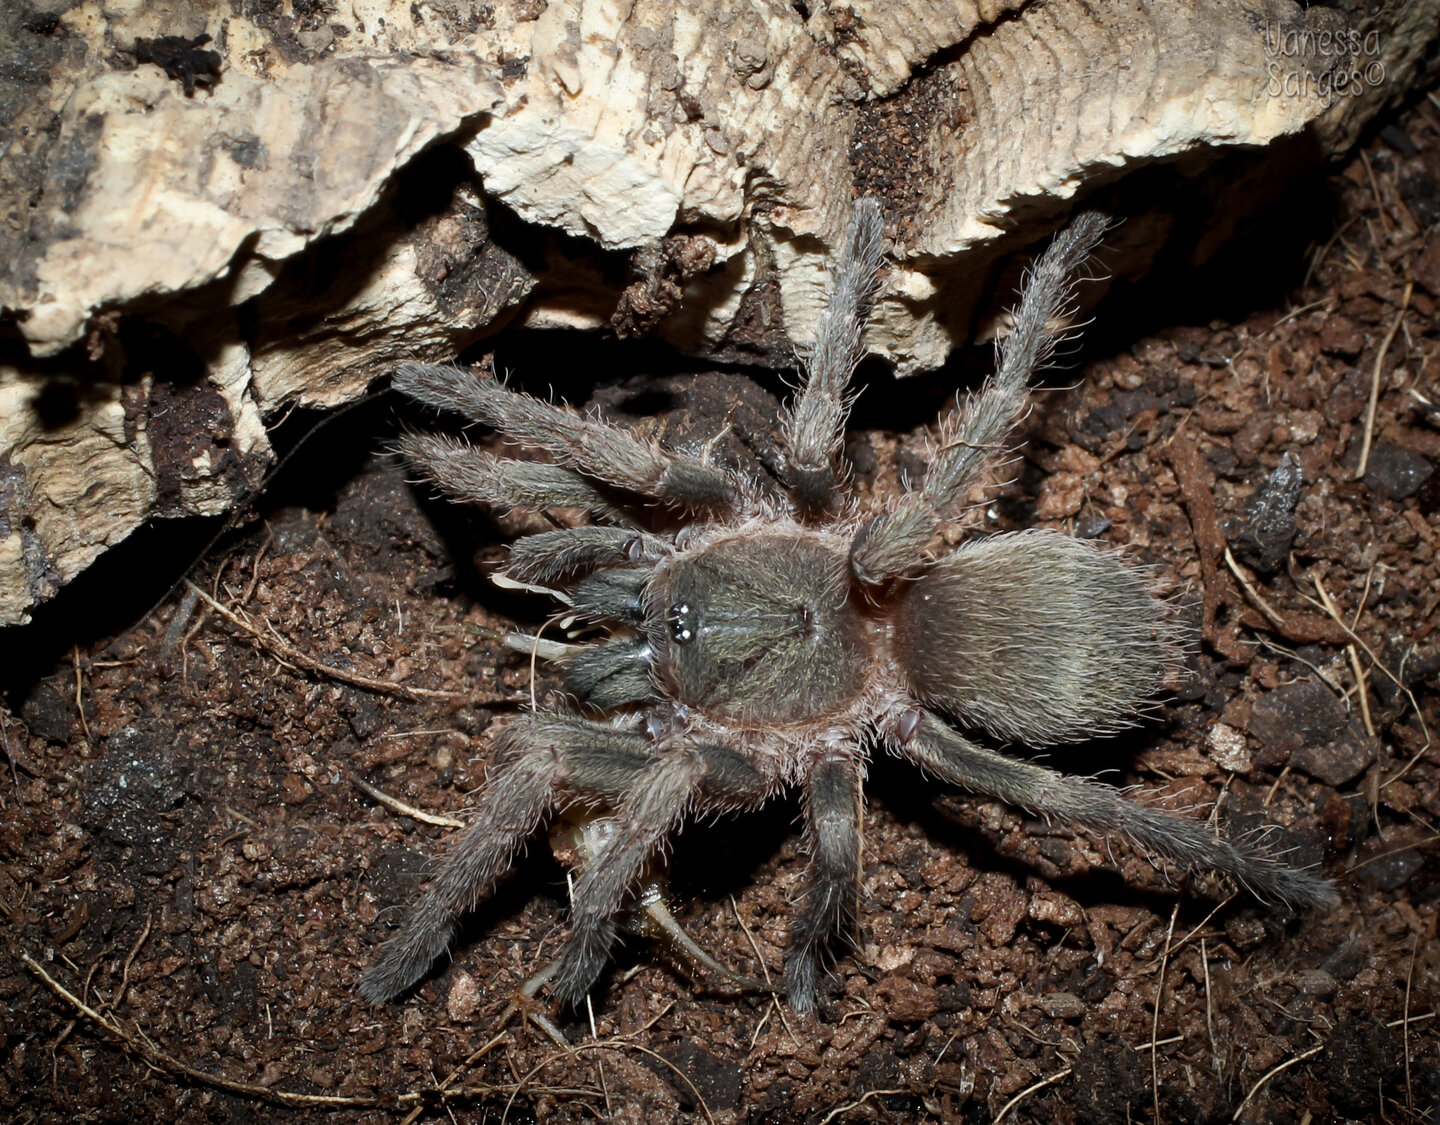 Neischnocolus sp. Colombia 2" Adult Female